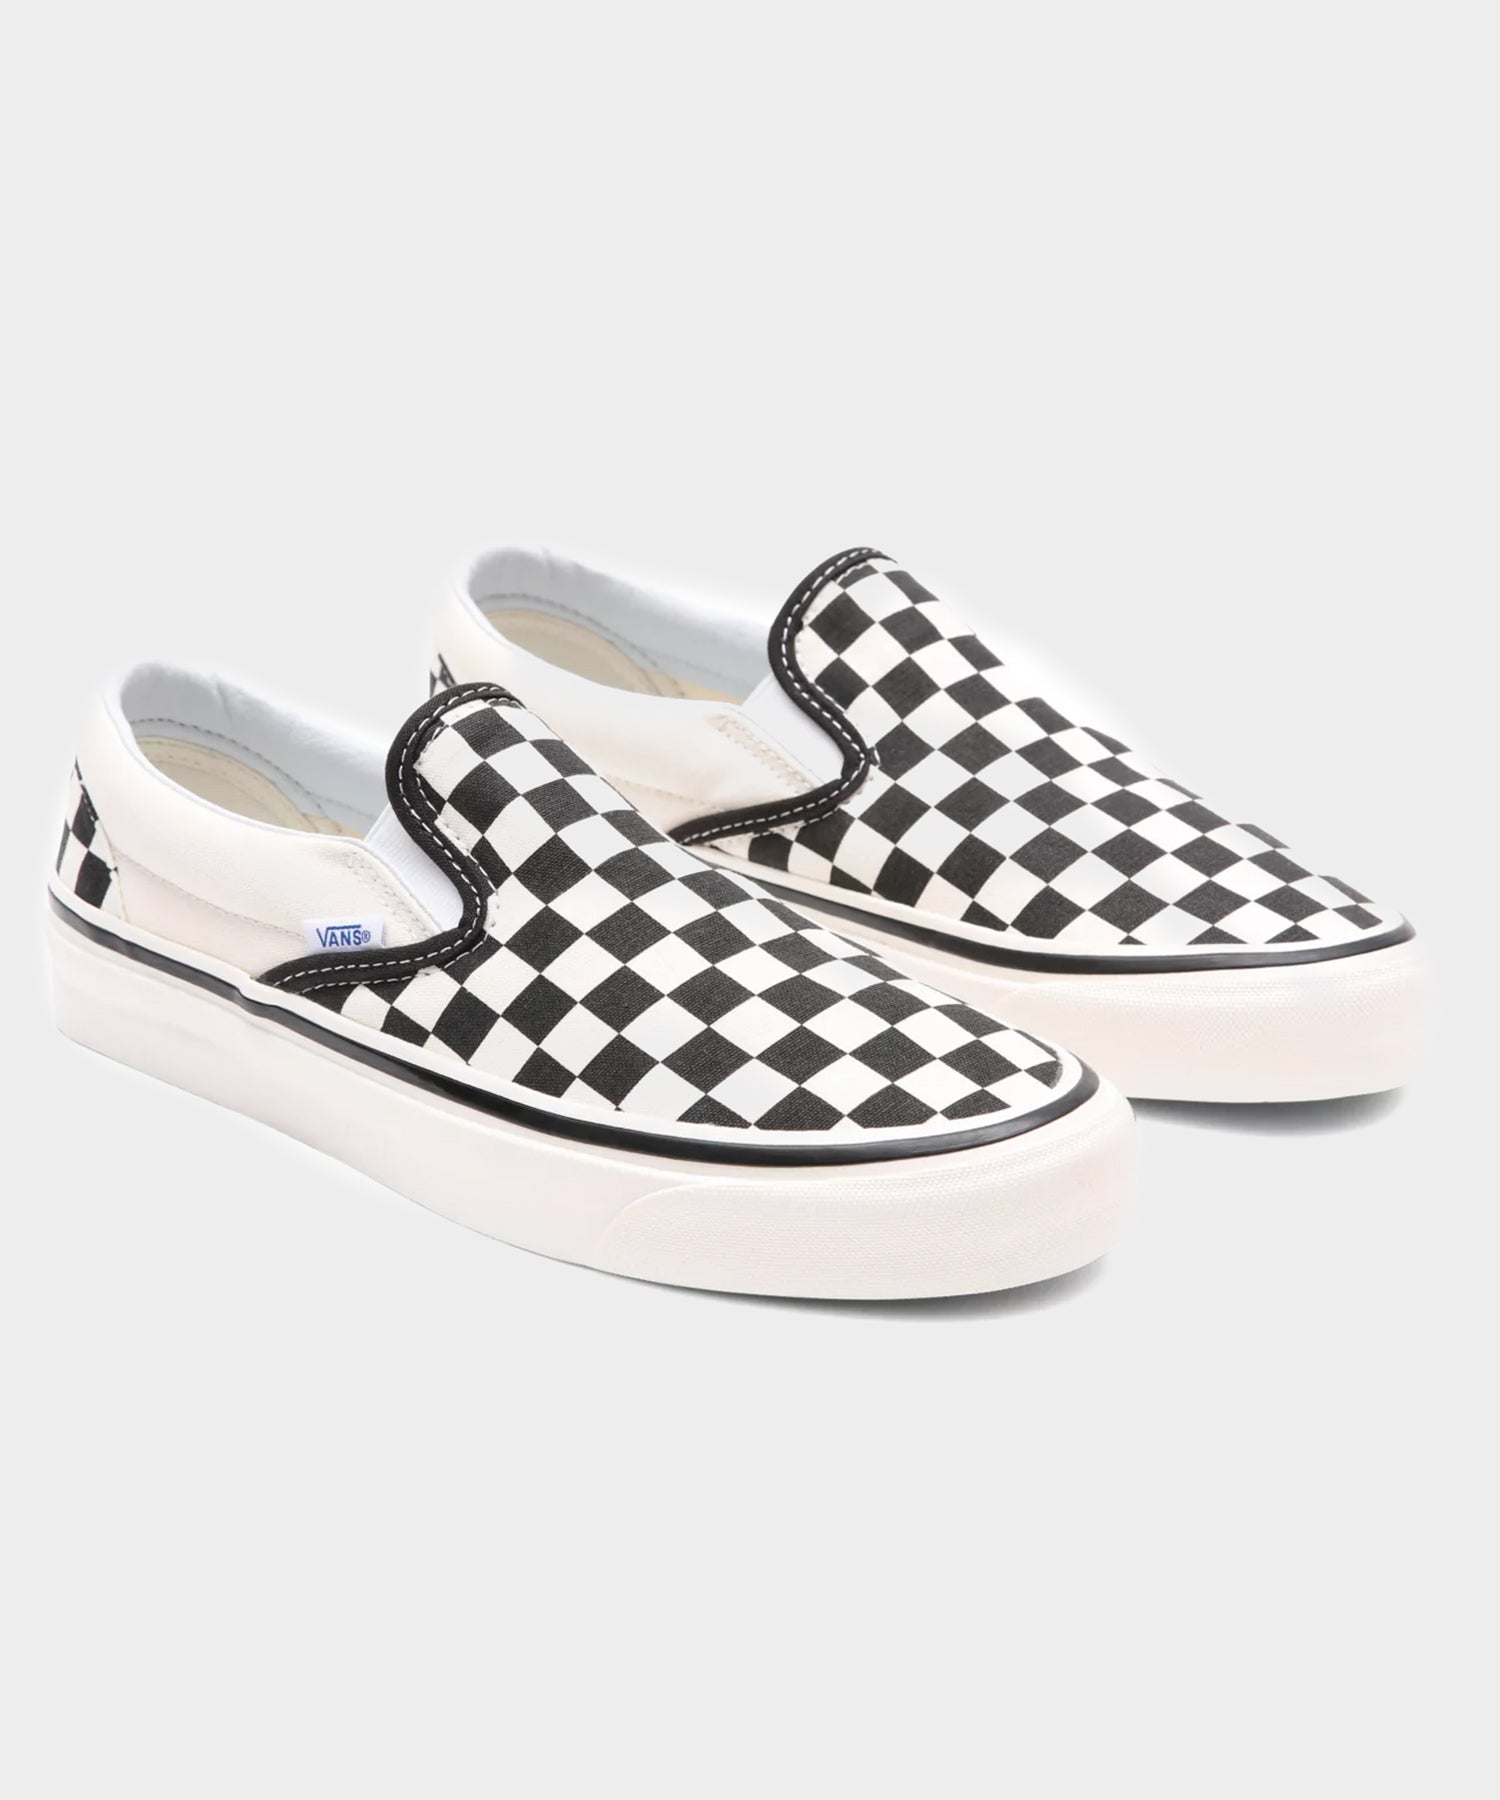 uvidenhed Sway Hør efter Vans Anaheim Factory Classic Slip On in Checkerboard